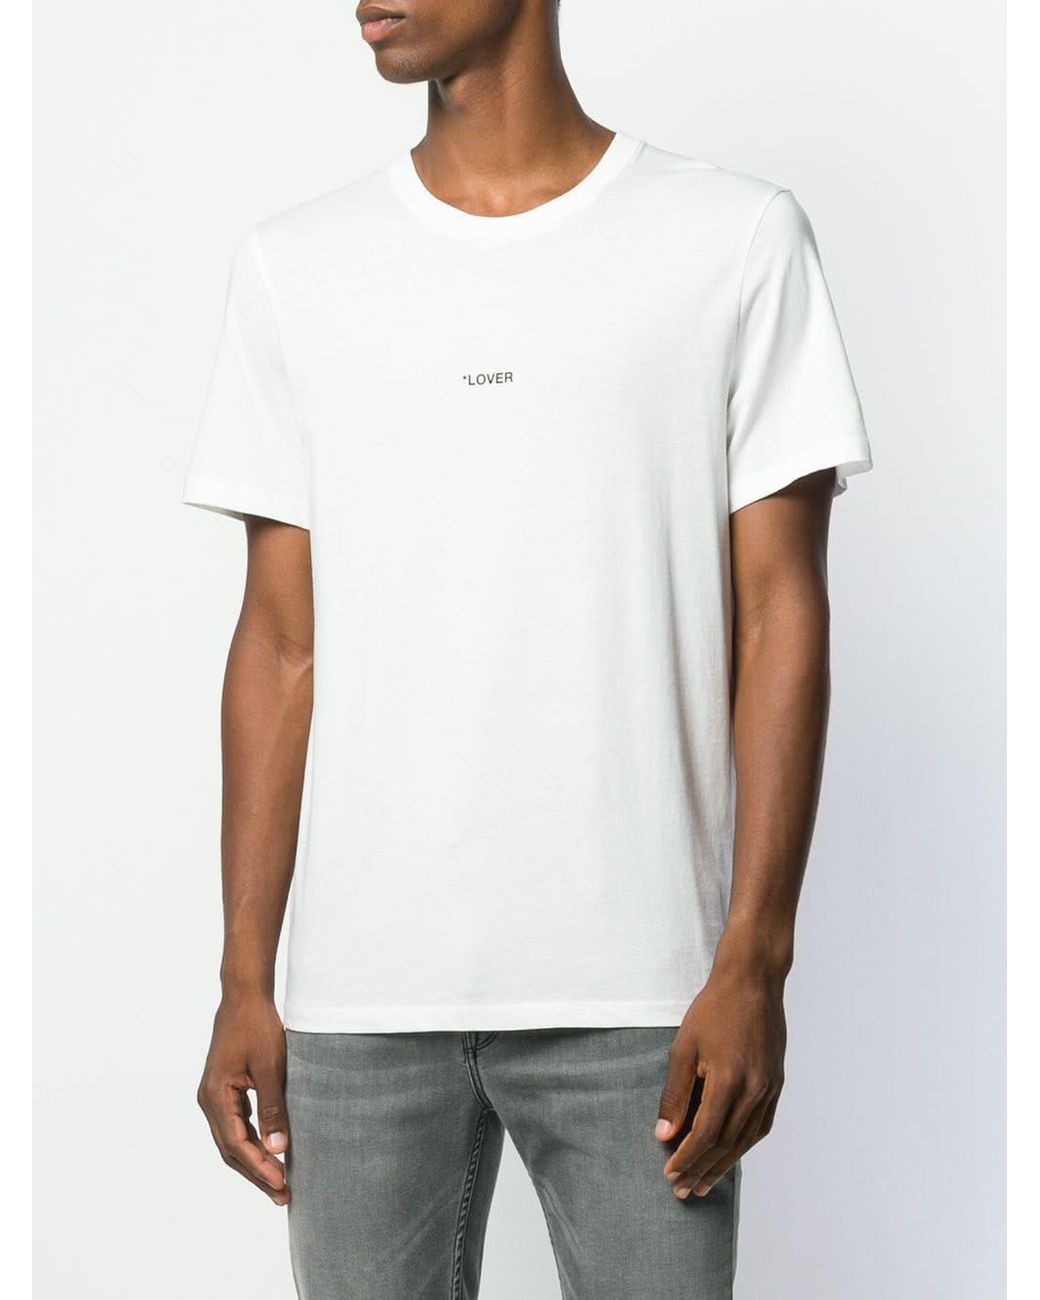 Zadig & Voltaire Lover Photoprint T-shirt in White for Men | Lyst